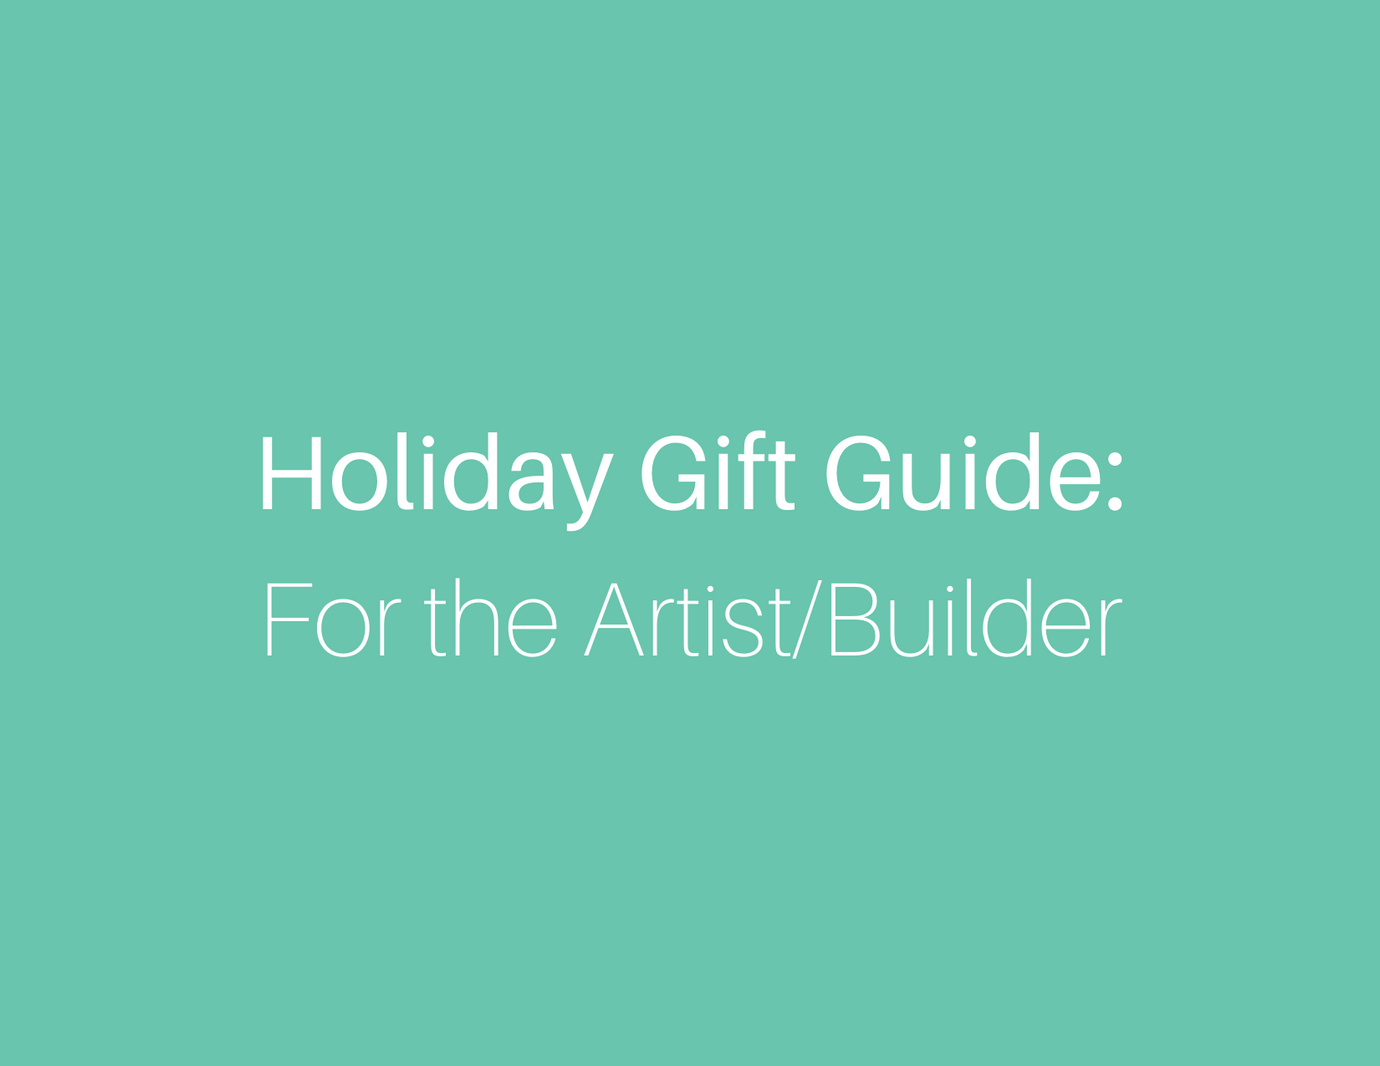 Holiday Gift Guide for the Artist/Builder